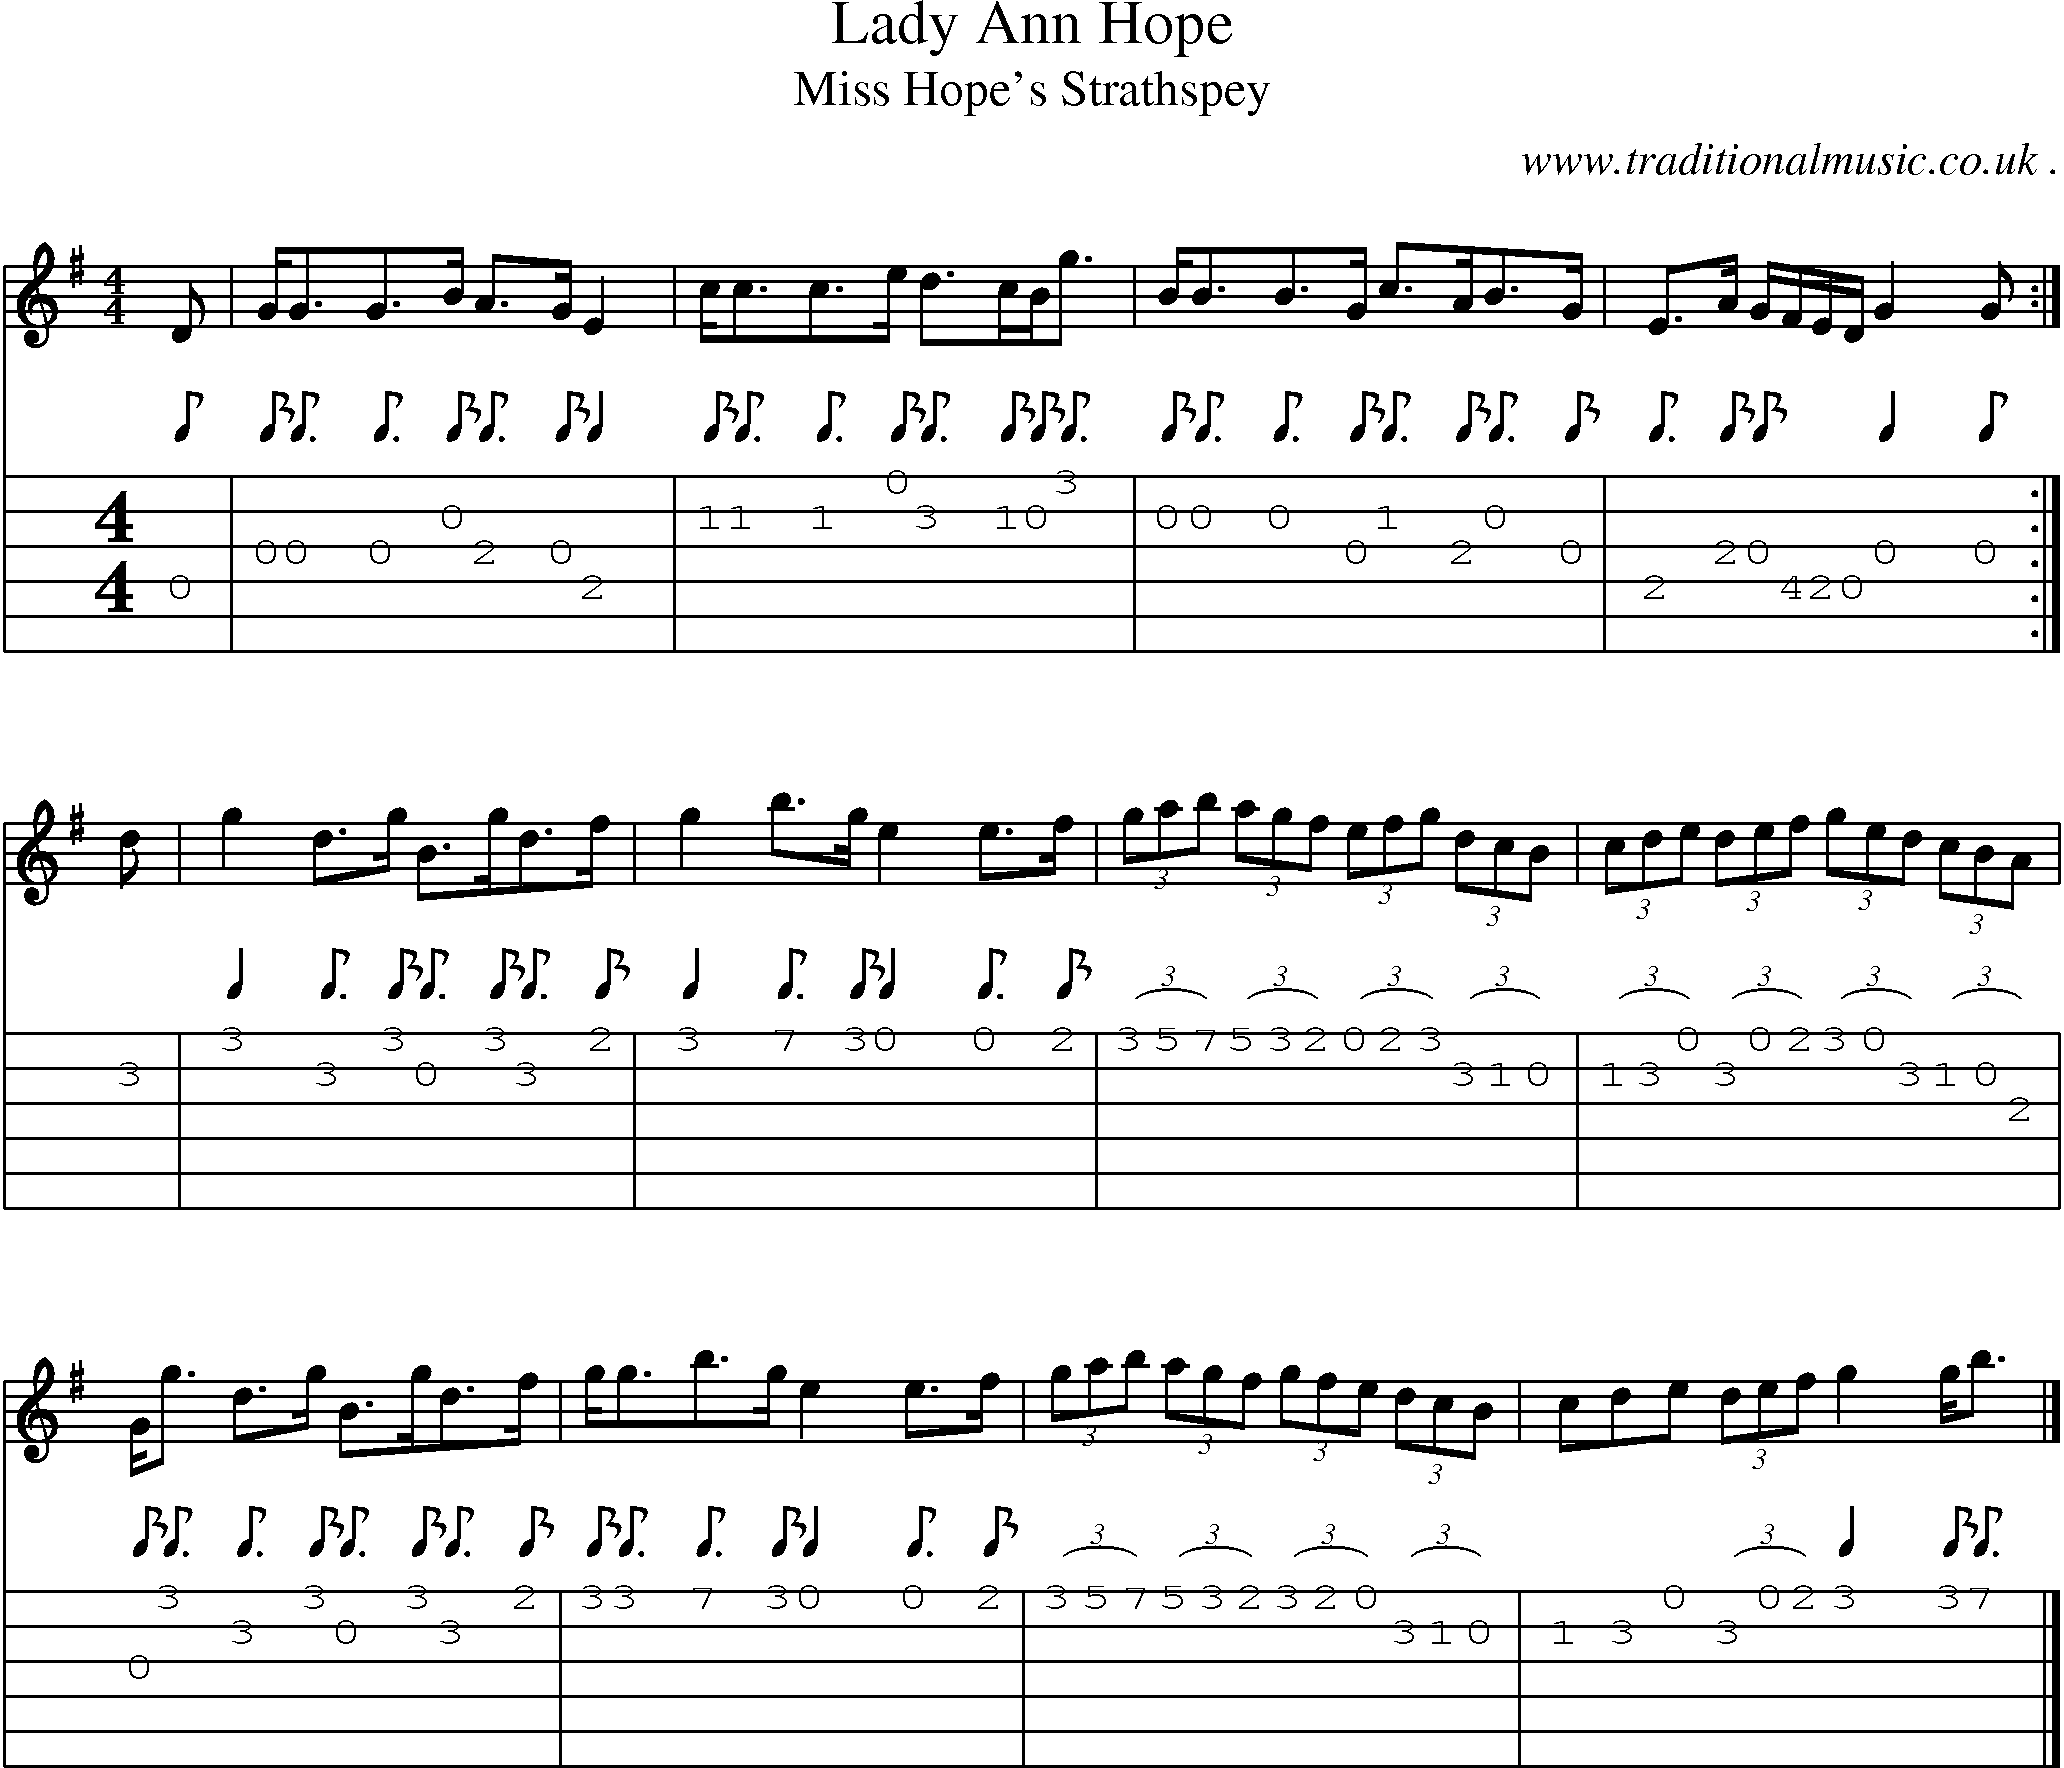 Sheet-music  score, Chords and Guitar Tabs for Lady Ann Hope 